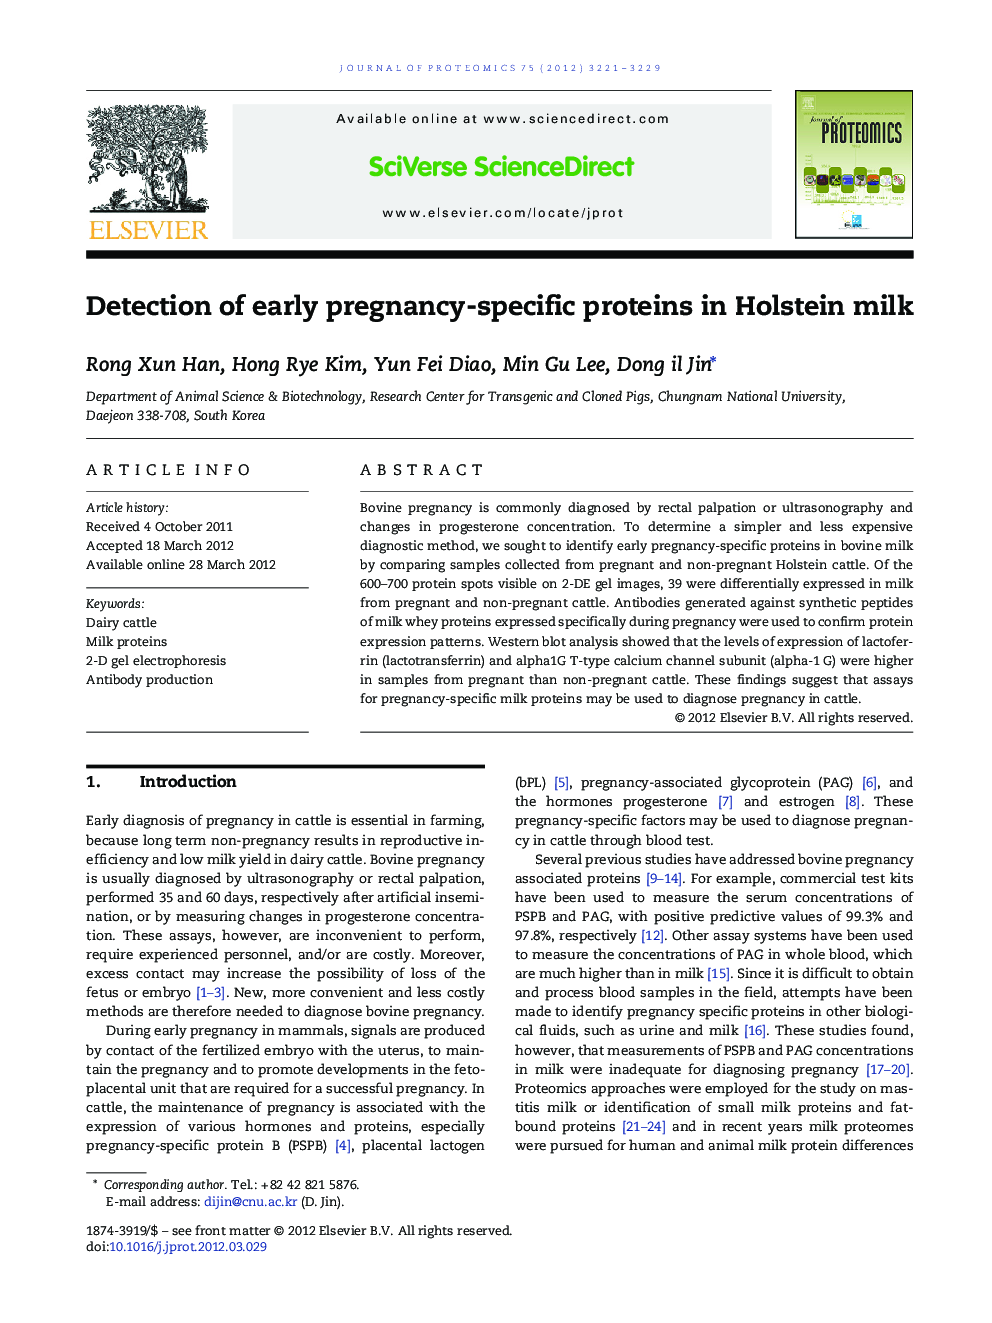 Detection of early pregnancy-specific proteins in Holstein milk